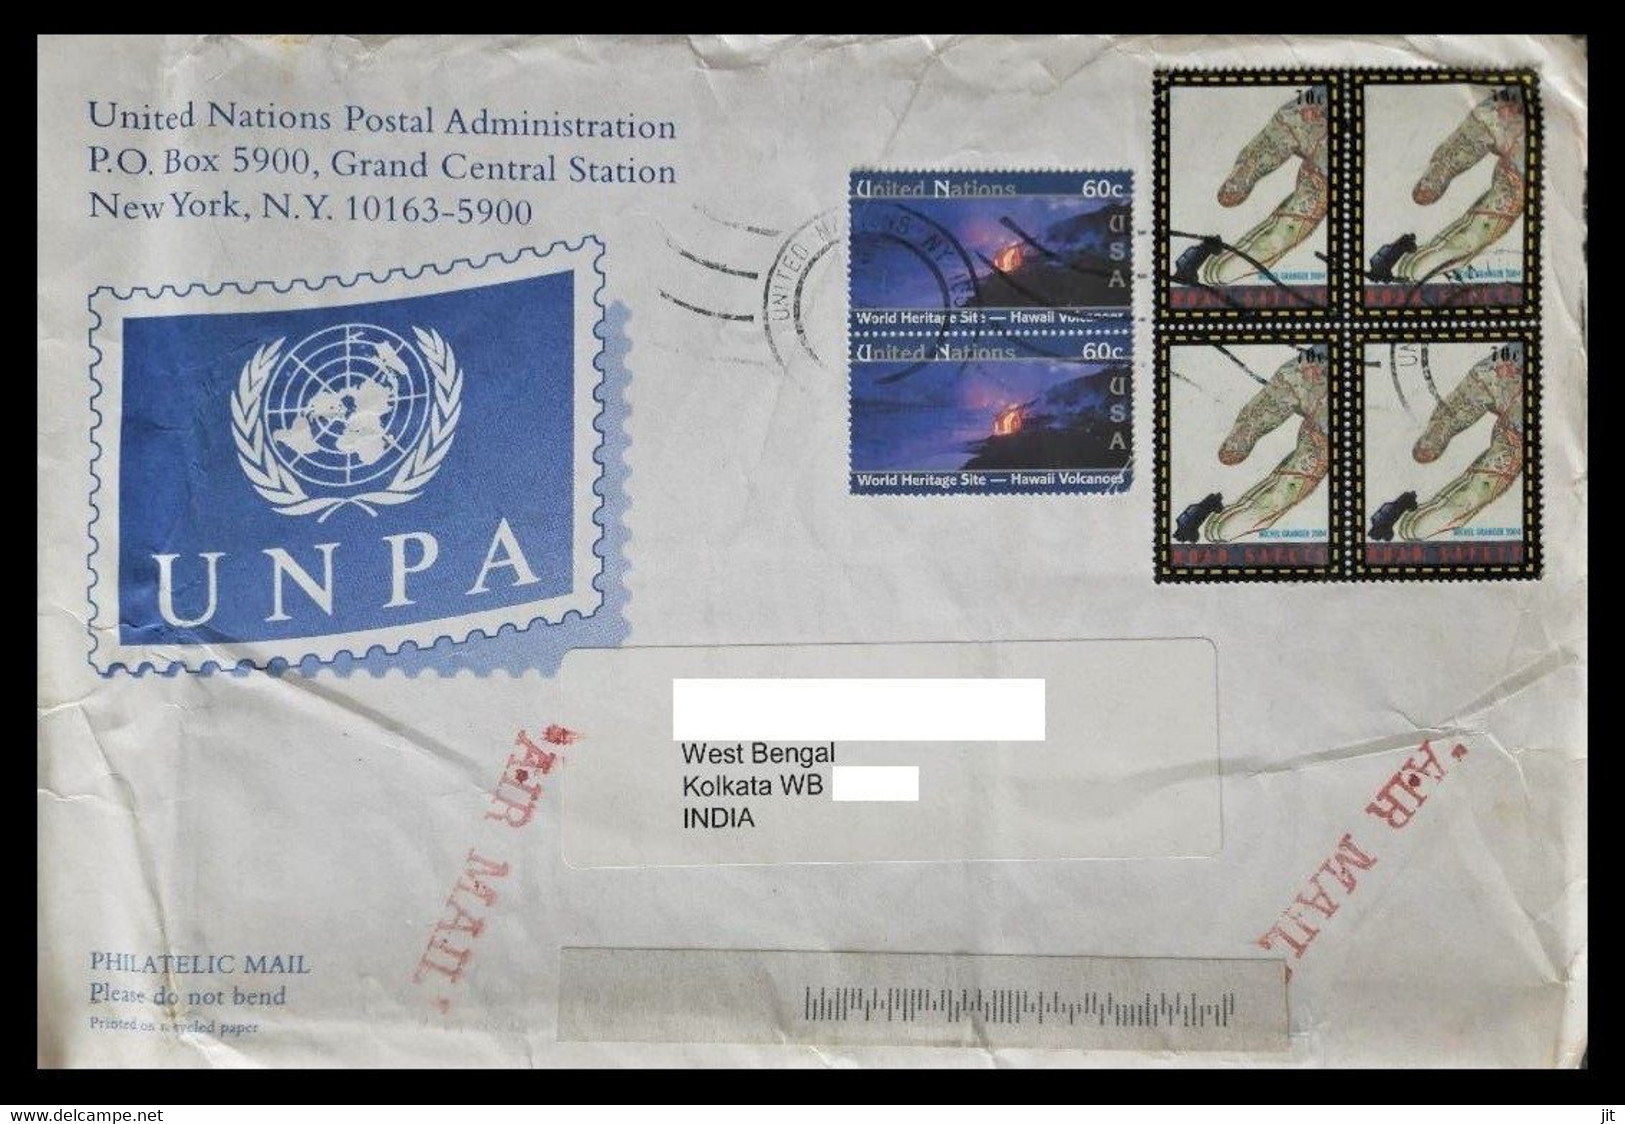 165.UNITED NATIONS 2008 USED COVER TO INDIA WITH STAMPS ,WORLD HERITAGE SITES, ROAD SAFETY. - Briefe U. Dokumente